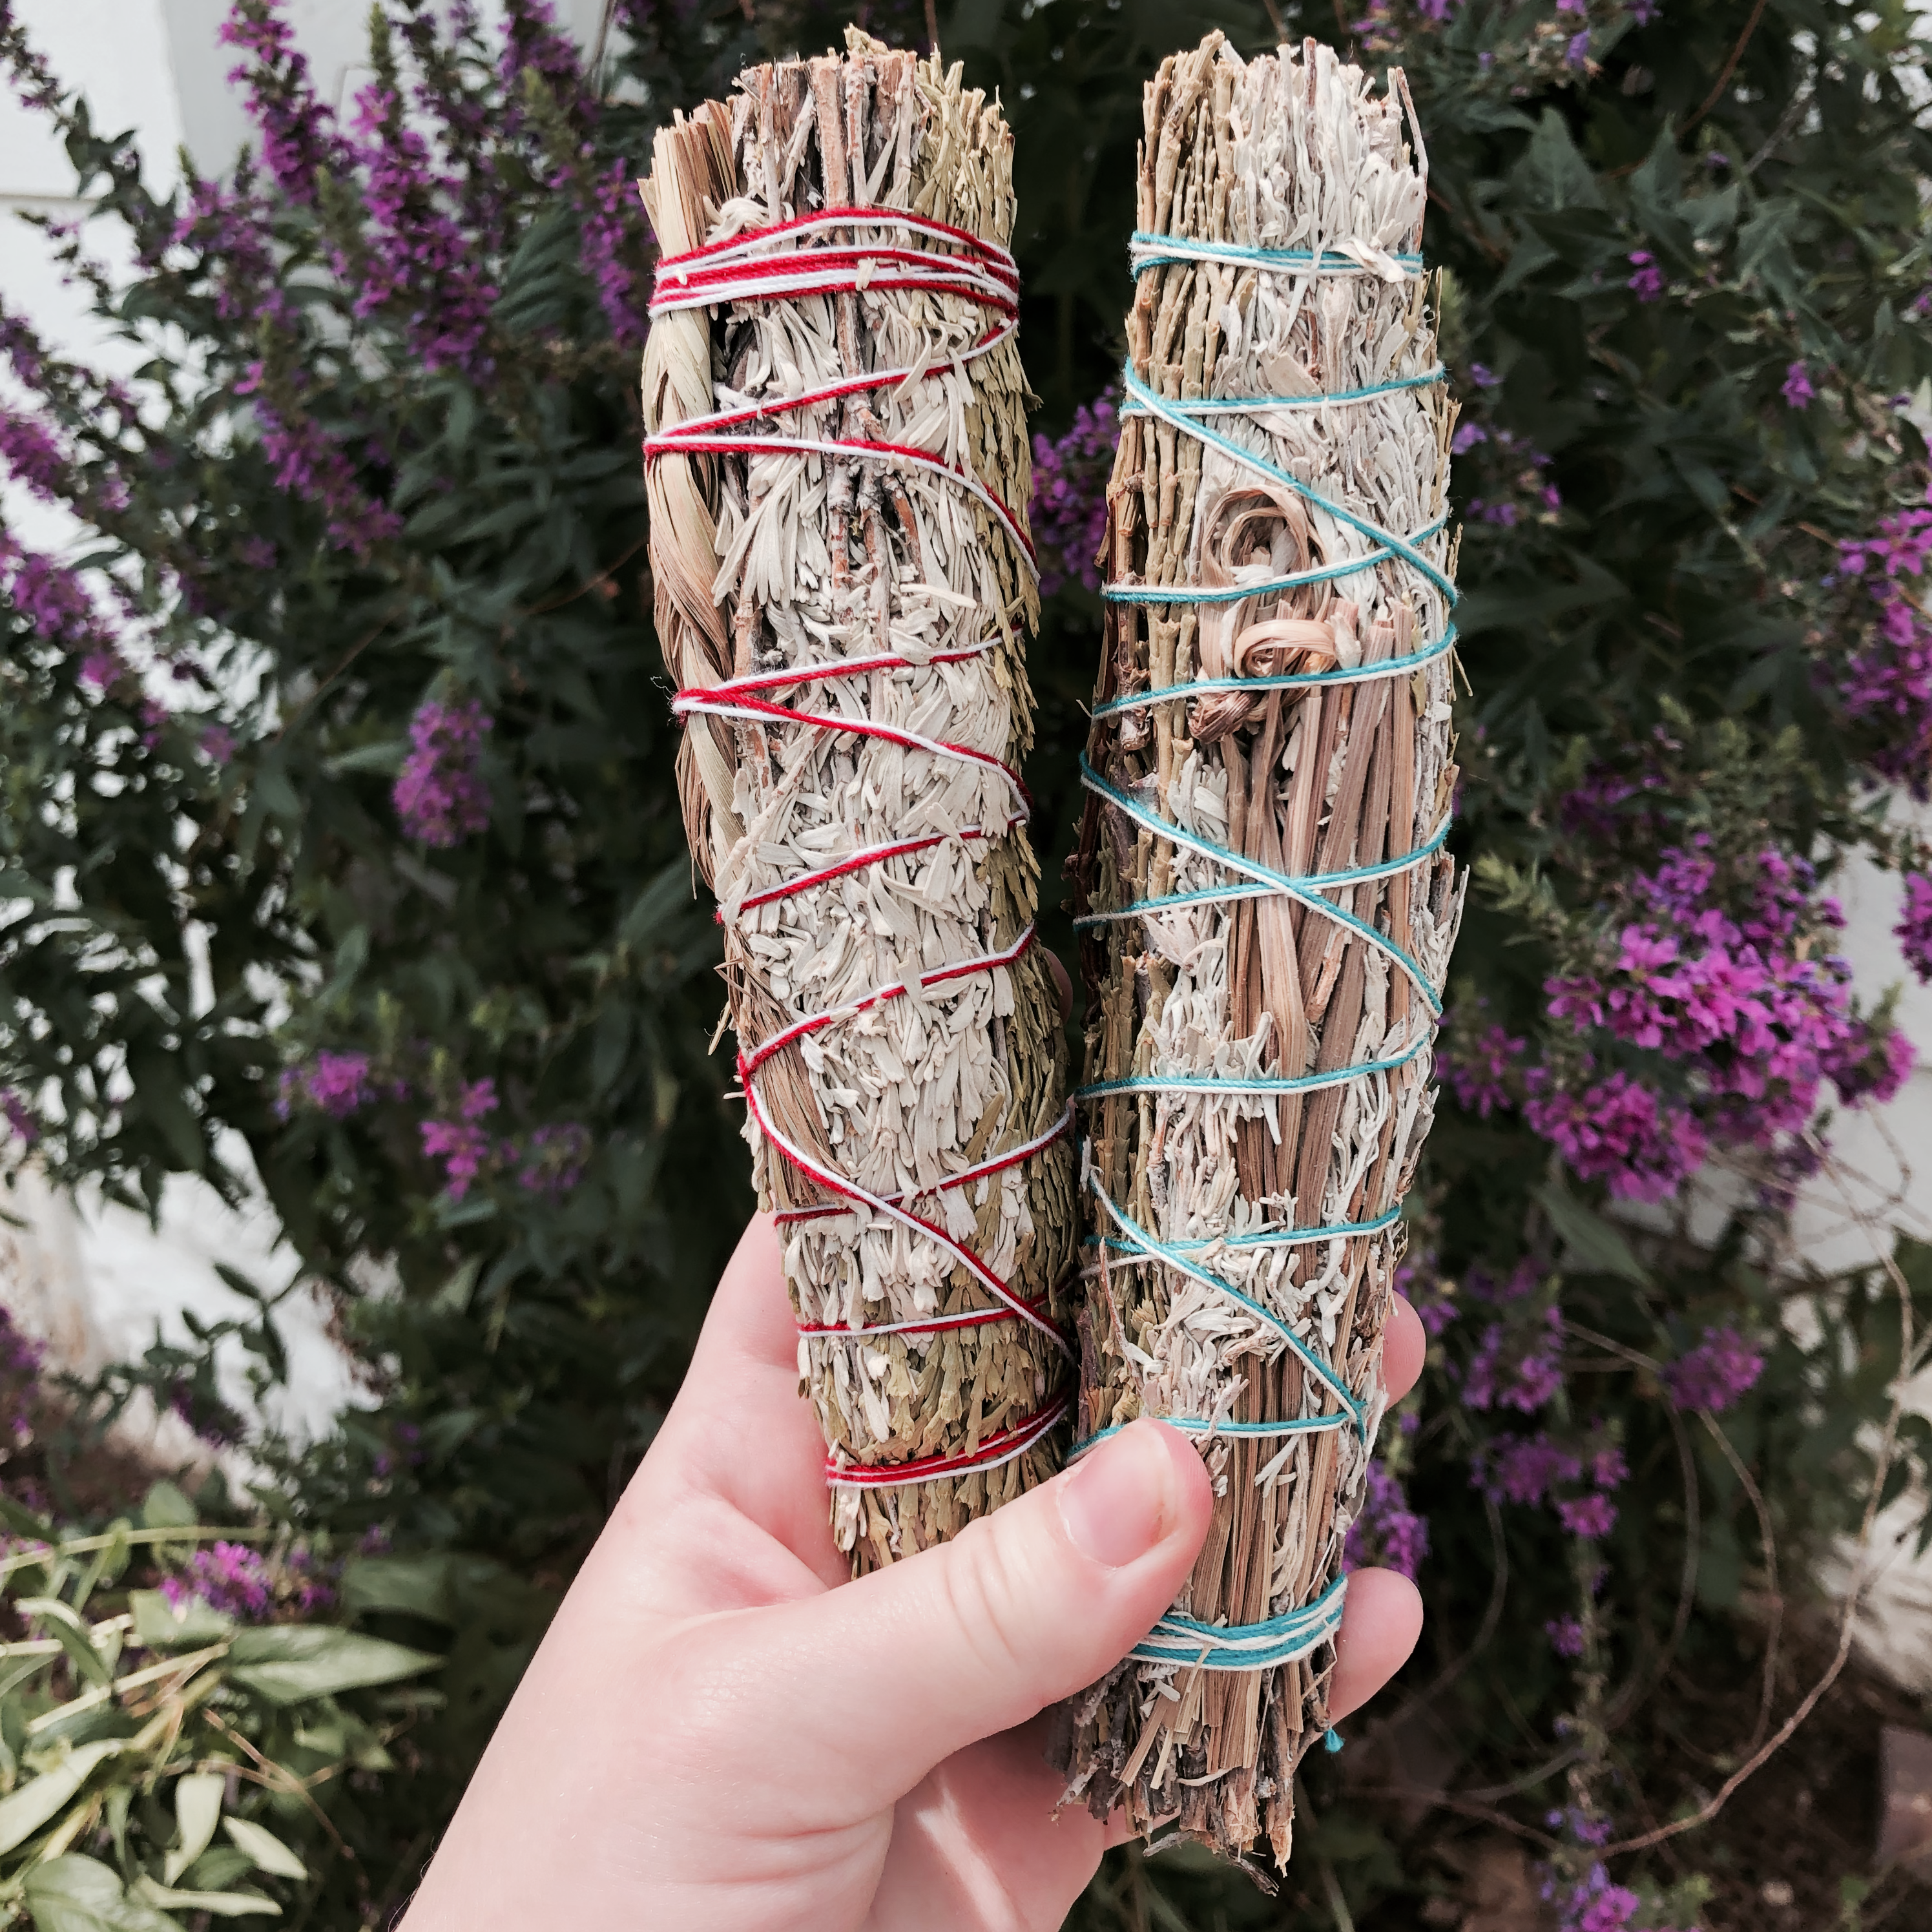 Many Native tribes in North America use sweetgrass in prayer, smudging or  purifying ceremonies and consider it a sacred plant.